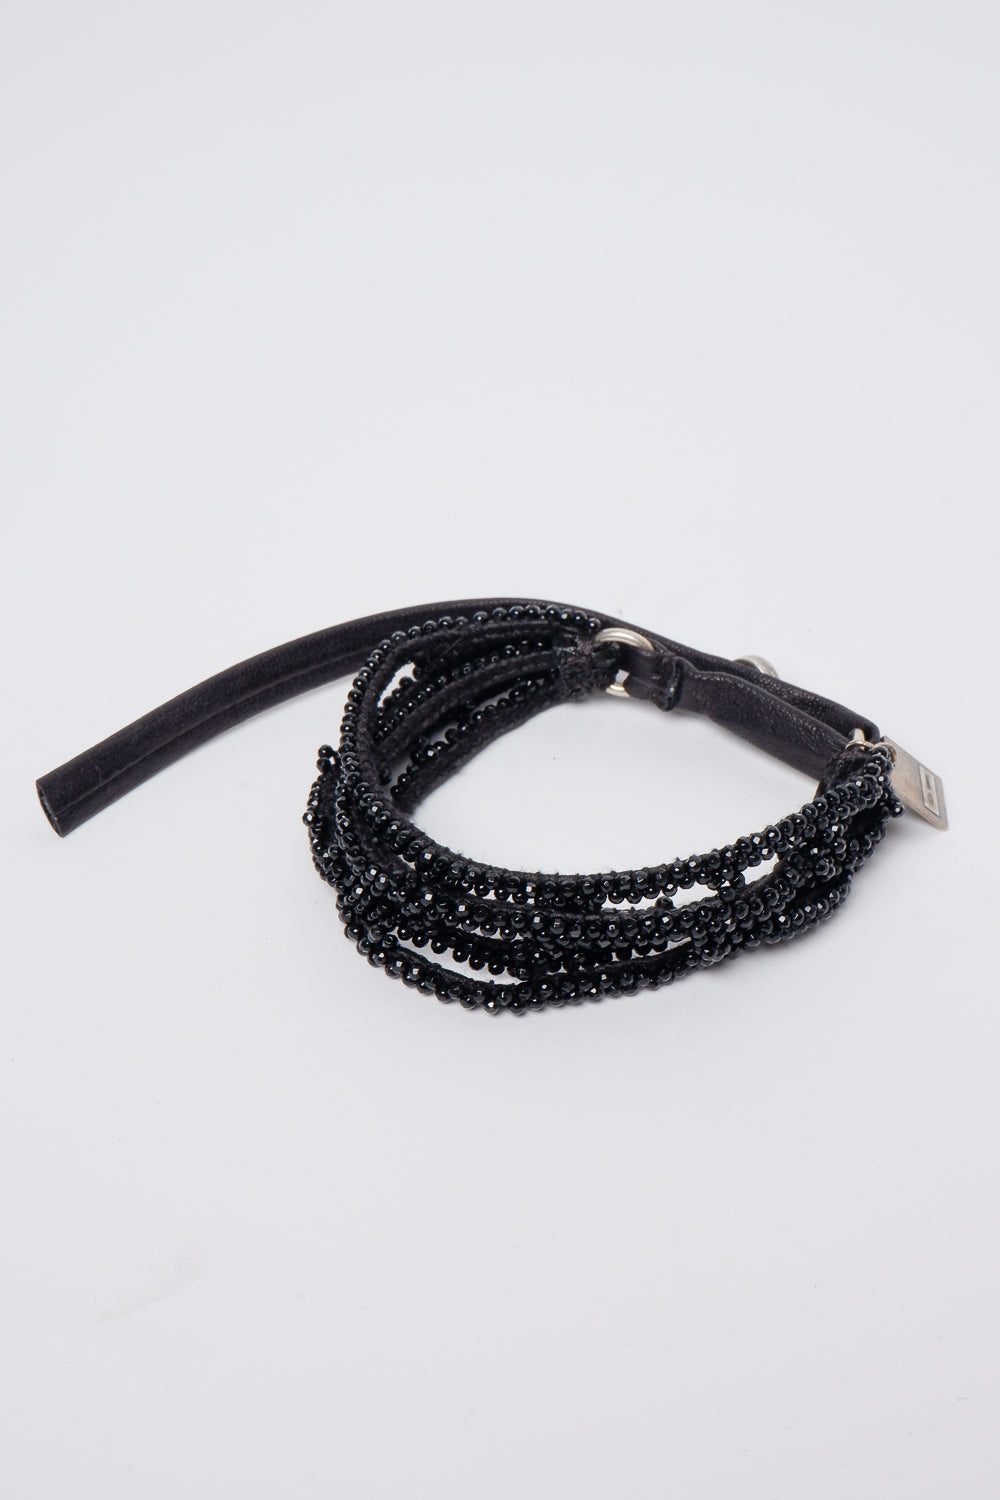 Buy the GOTI BR035 Bracelet at Intro. Spend £50 for free UK delivery. Official stockists. We ship worldwide.